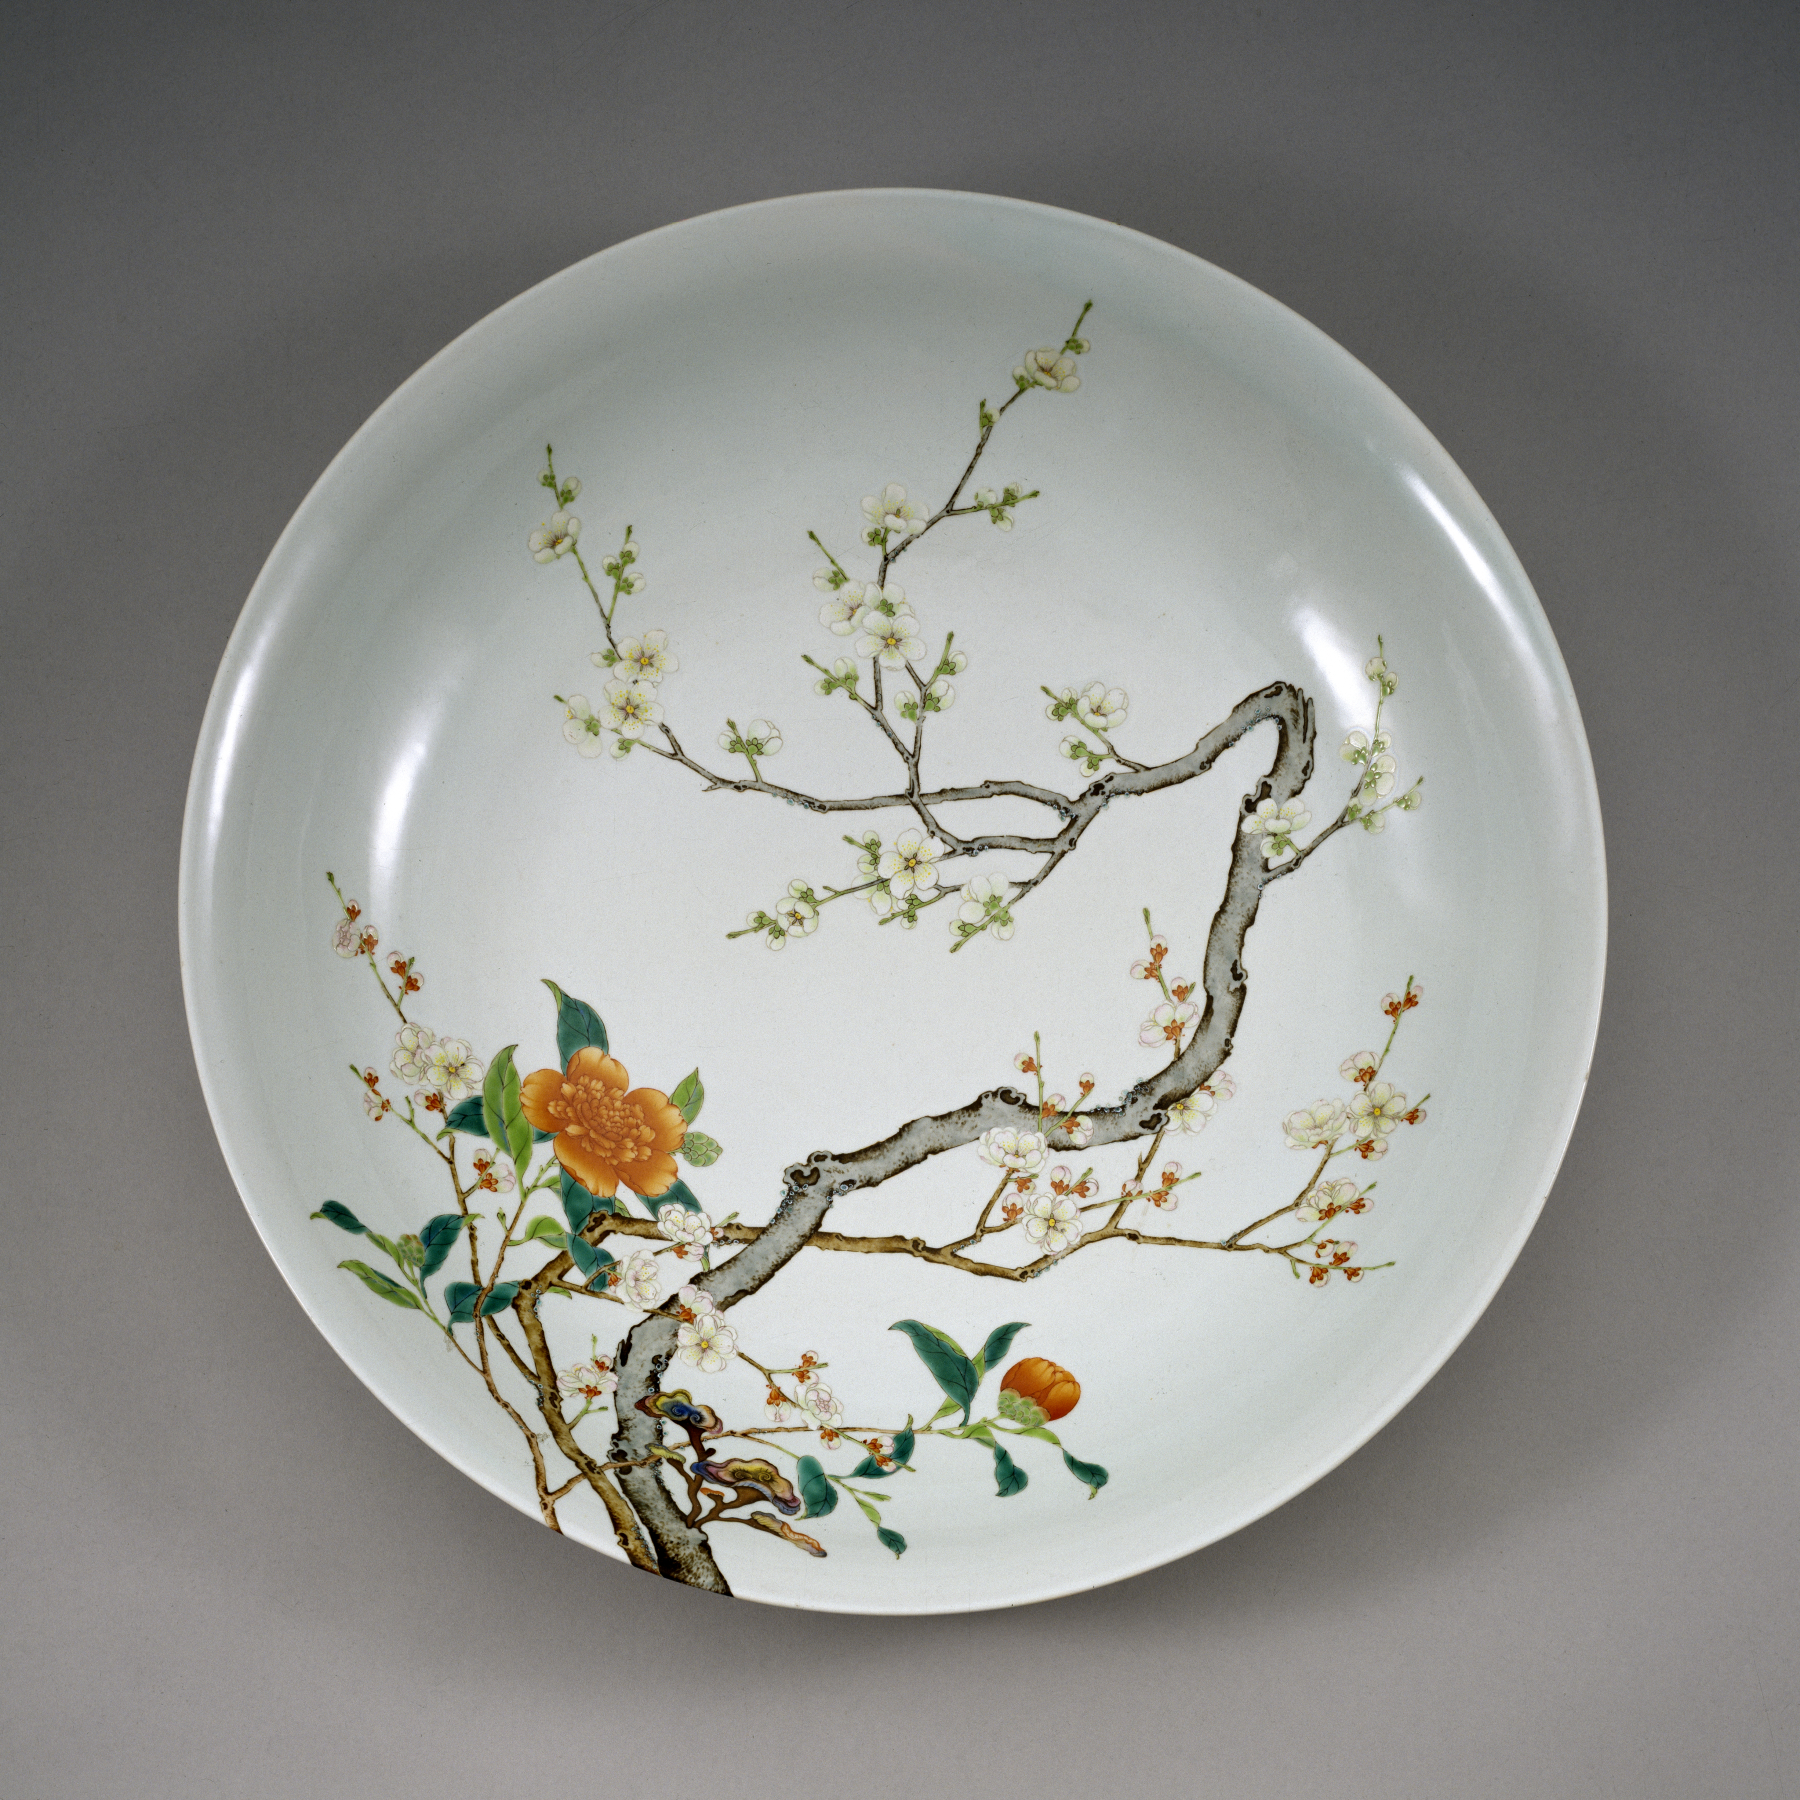 a porcelain plate with a flowering branch drawn on it